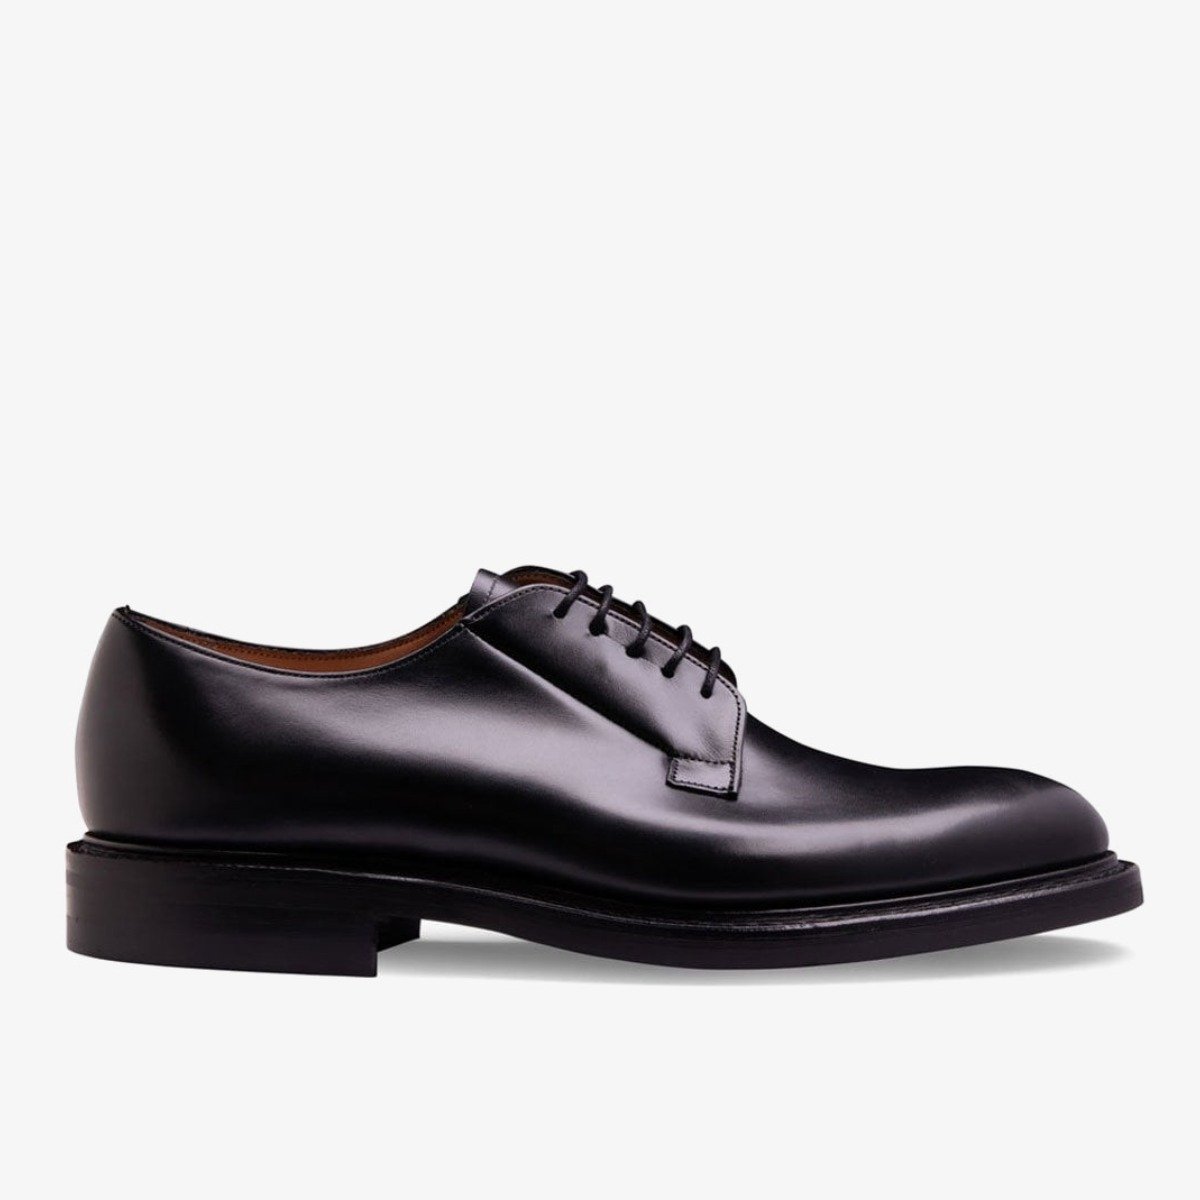 Cheaney Deal II black blucher shoes